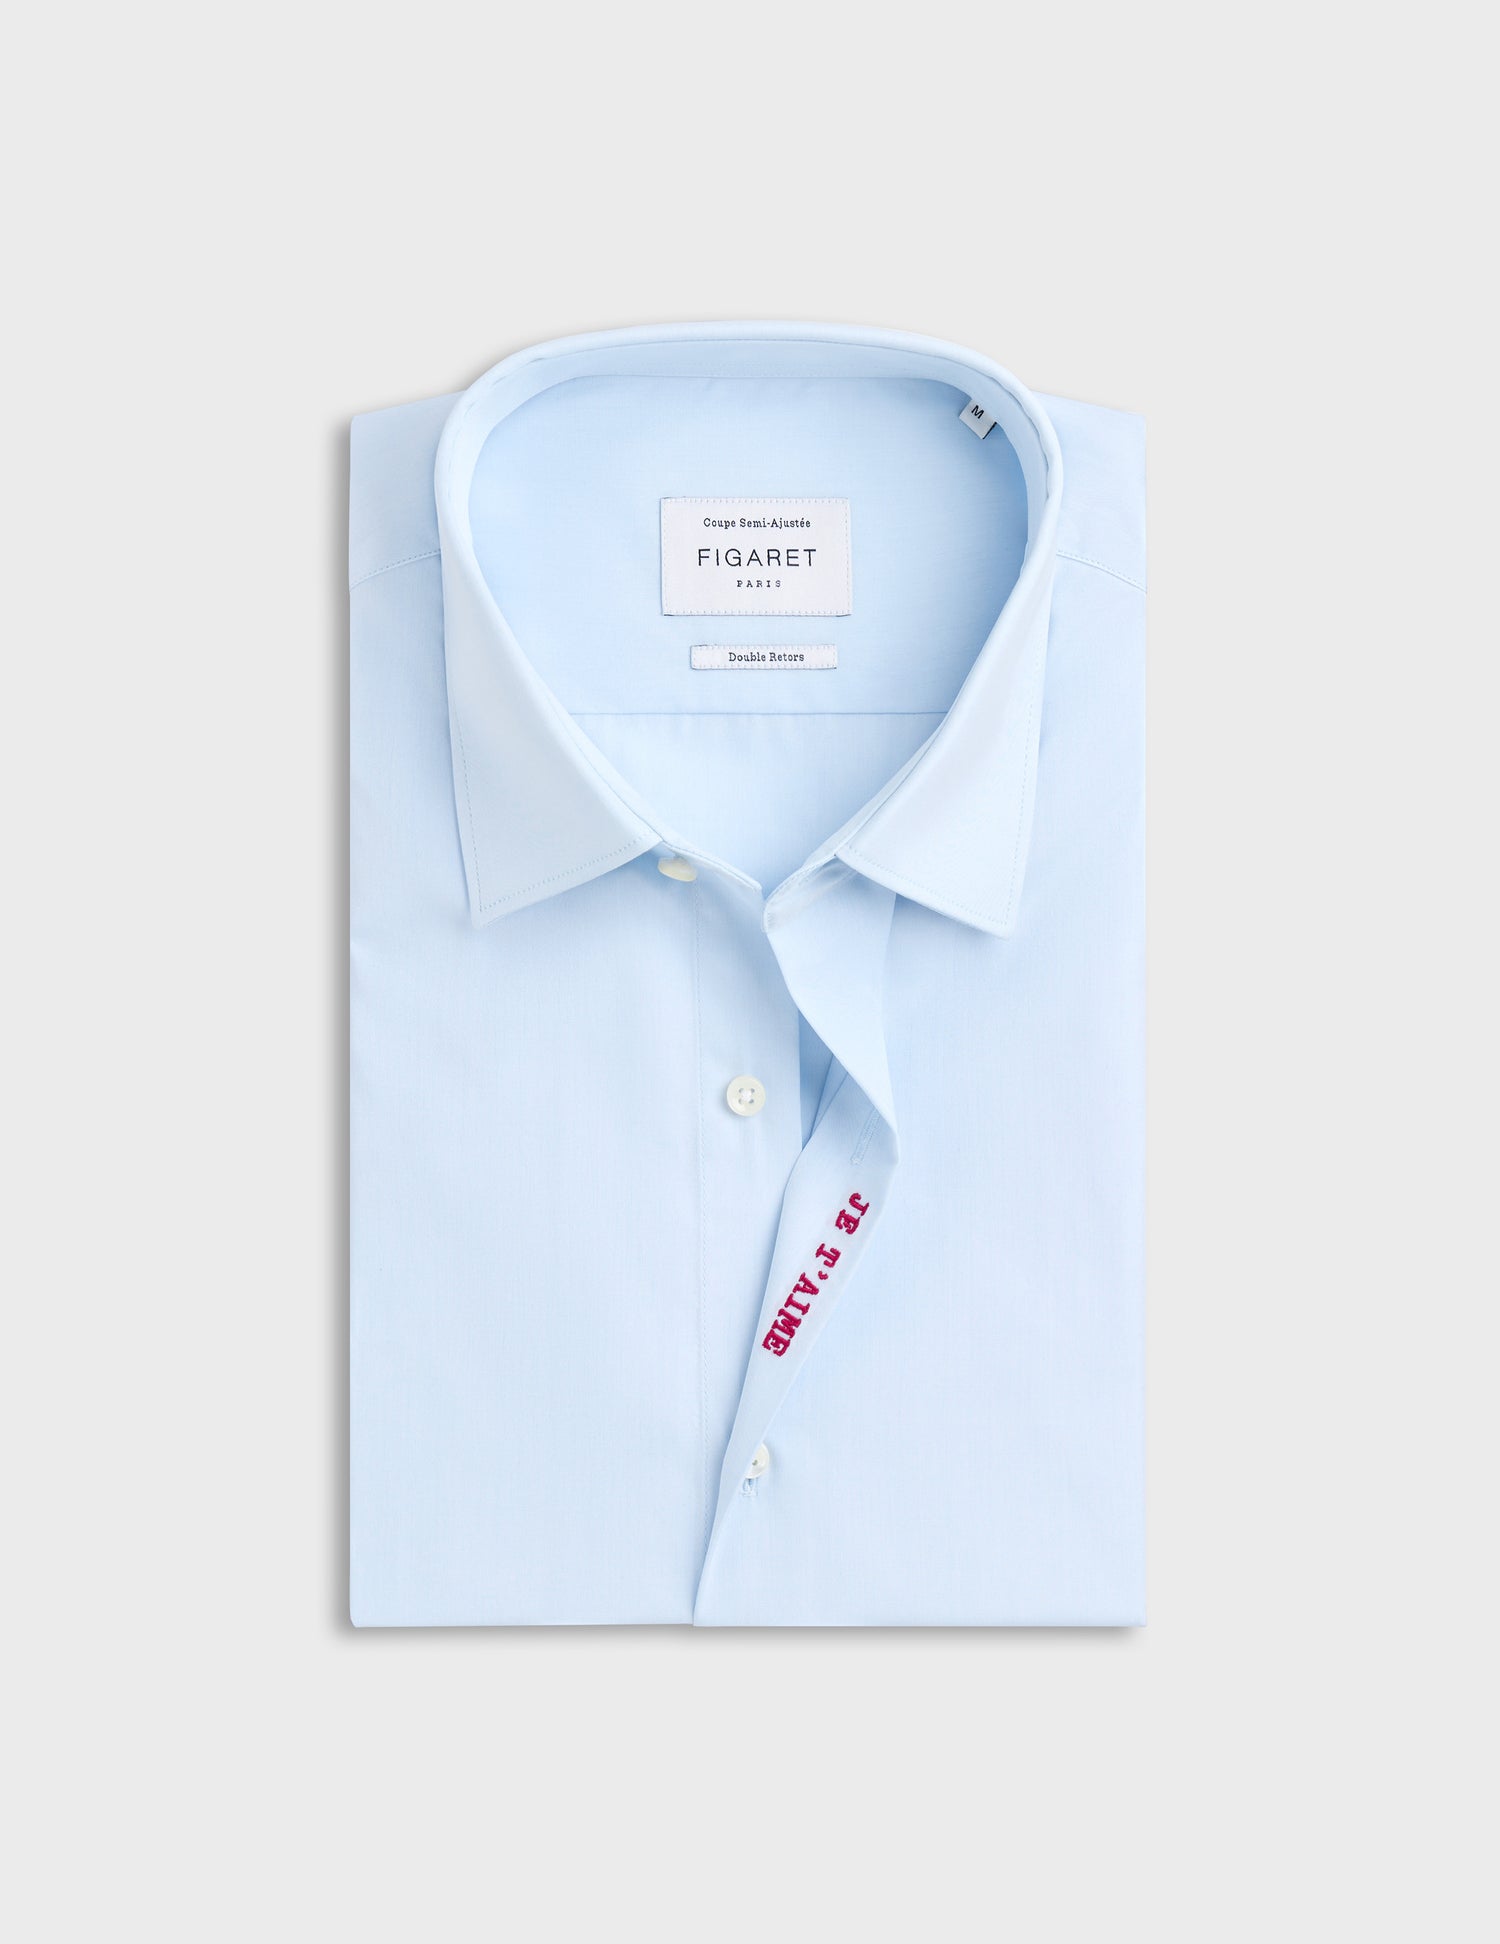 Blue "Je t'aime" shirt with red embroidery - Poplin - Figaret Collar#9